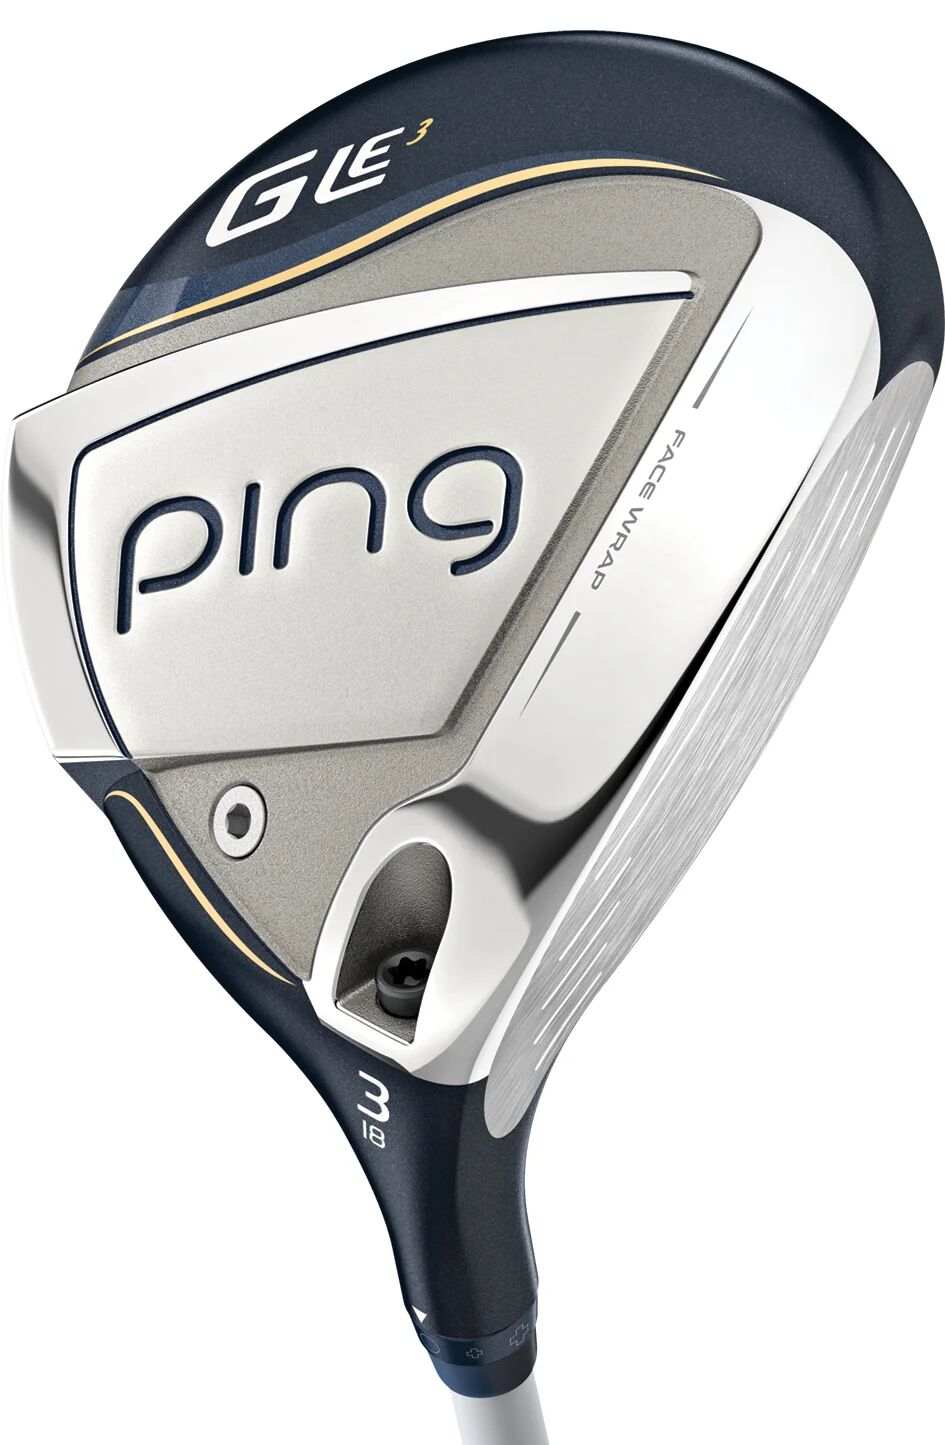 PING Womens G Le3 Fairway Woods - LEFT - ULT 250 LITE - #9/28 - Golf Clubs